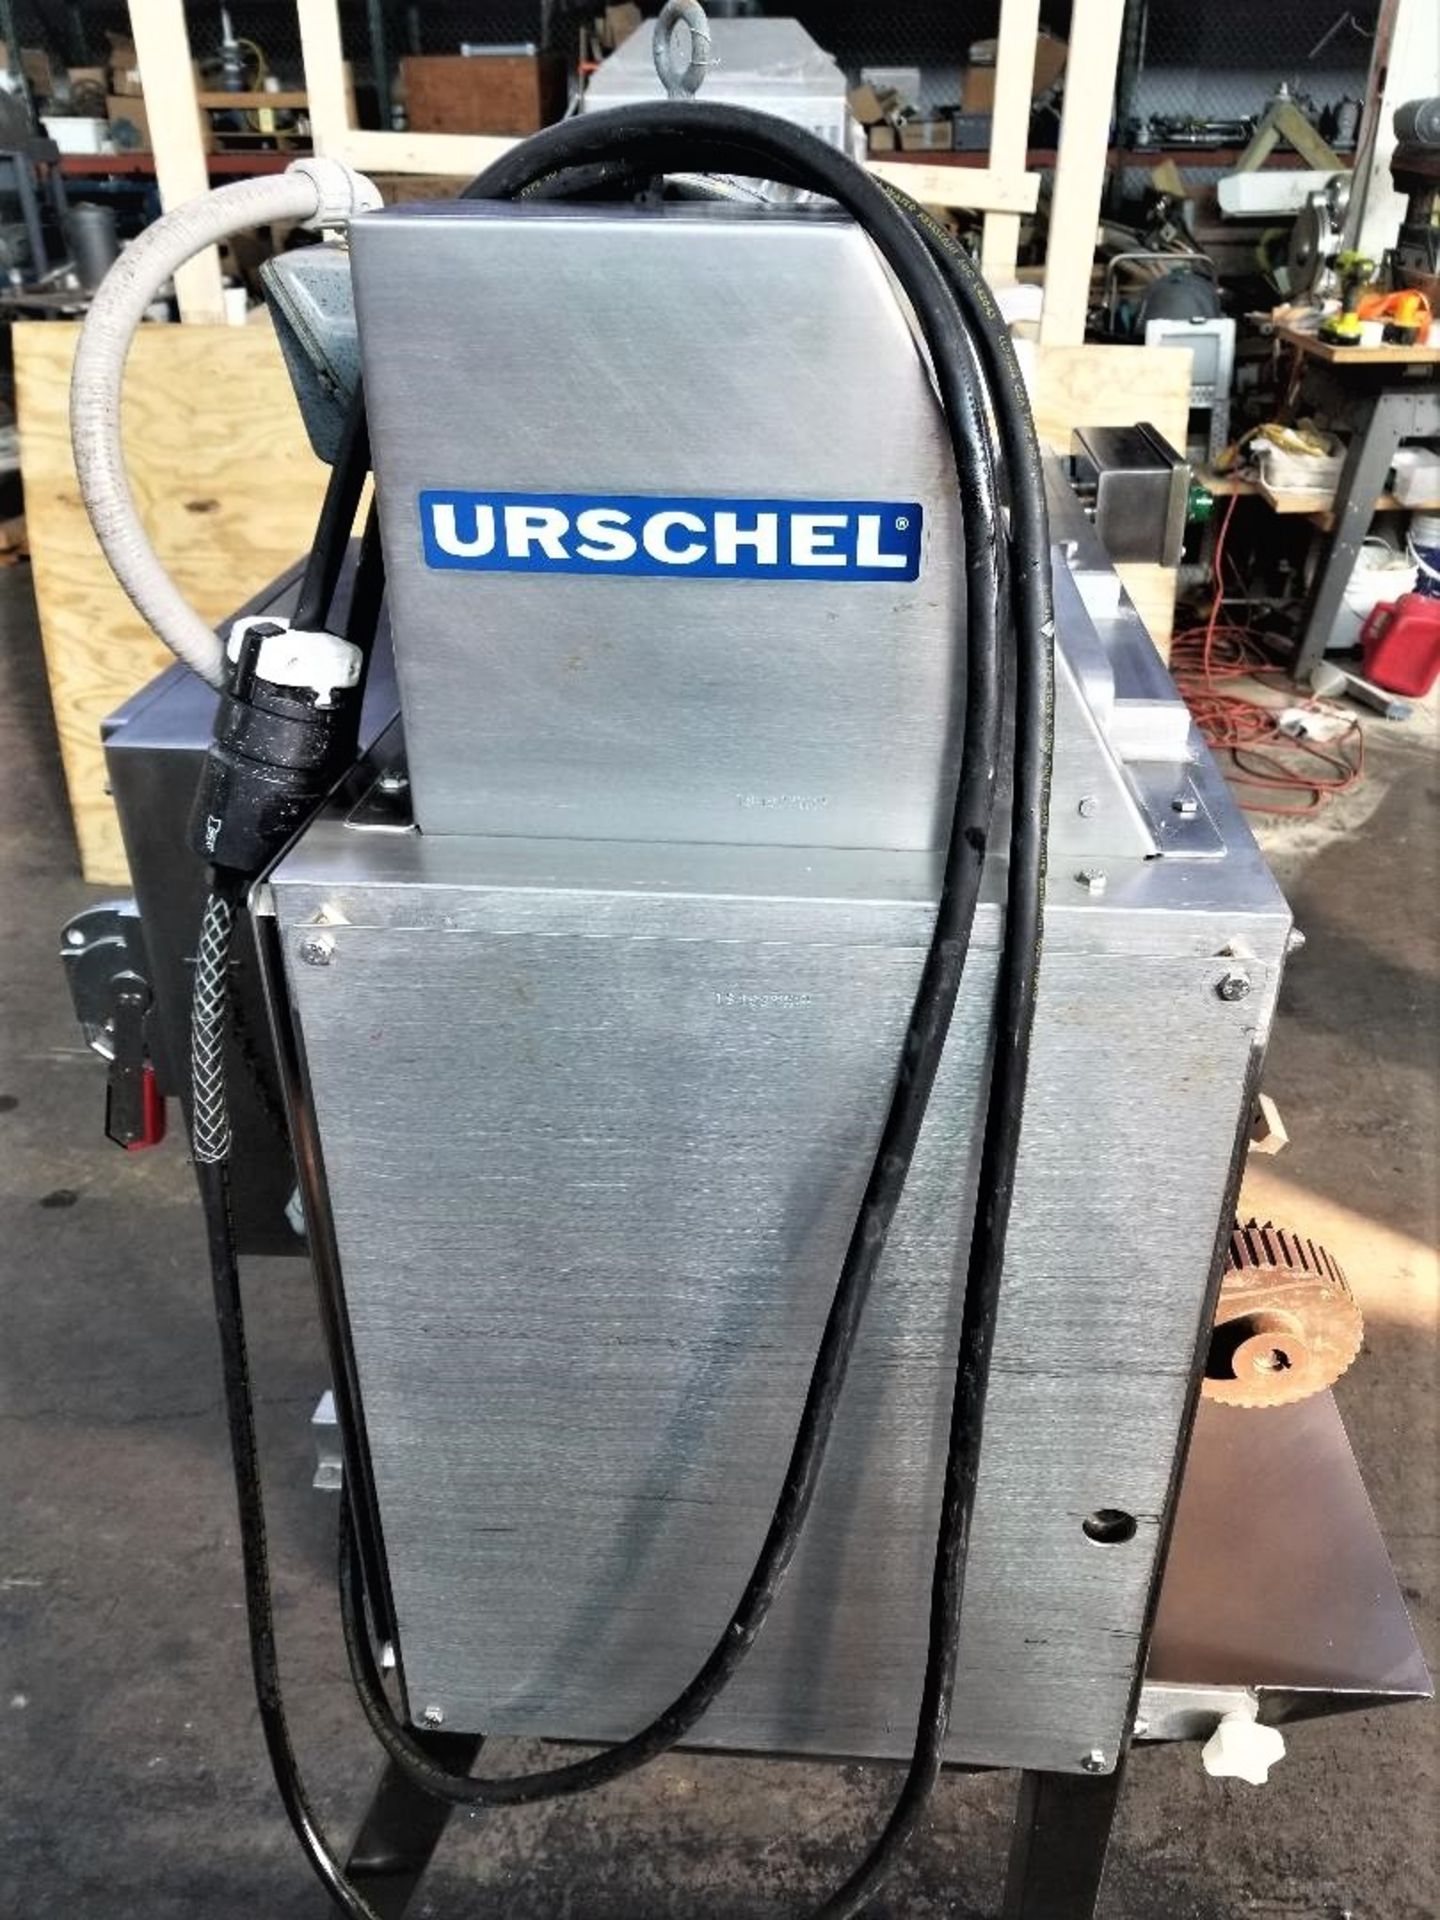 Urschel RAD S/S Sanitary Dicer, Model RA-D, S/N 1643 - Portable on Casters. This unit was last used - Image 4 of 11